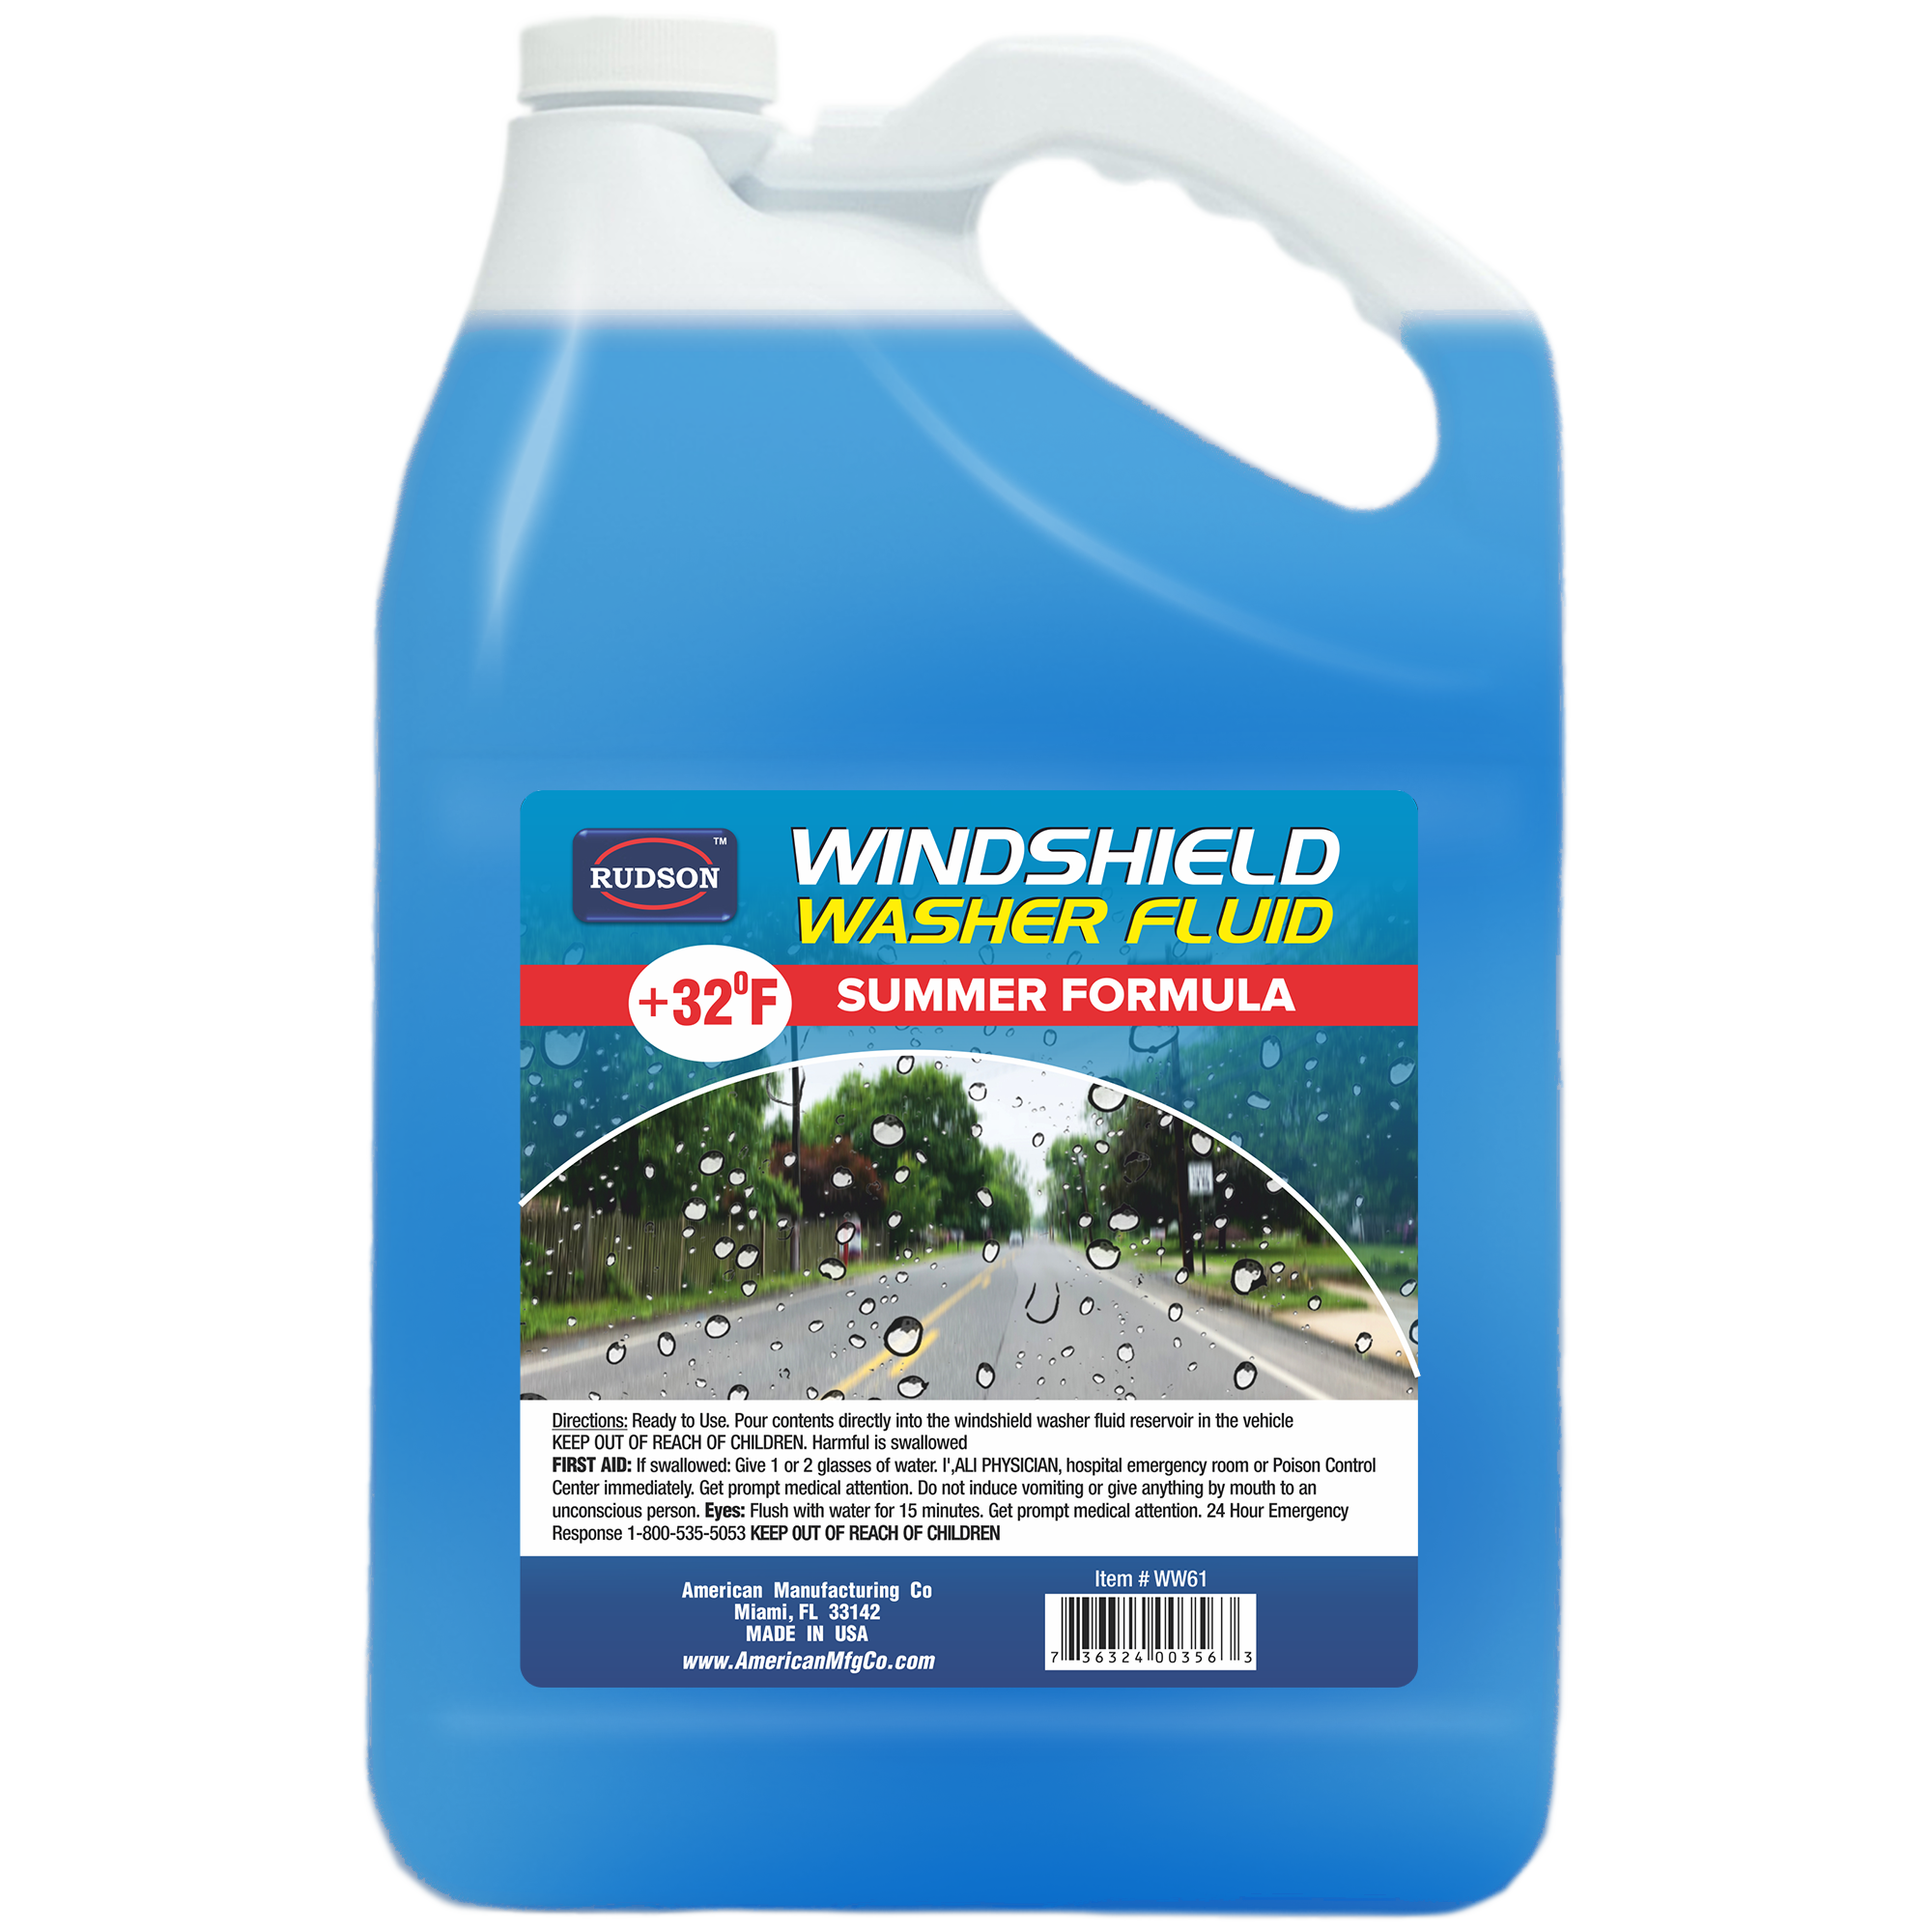 How to Choose Windshield Wiper Fluid for Winter